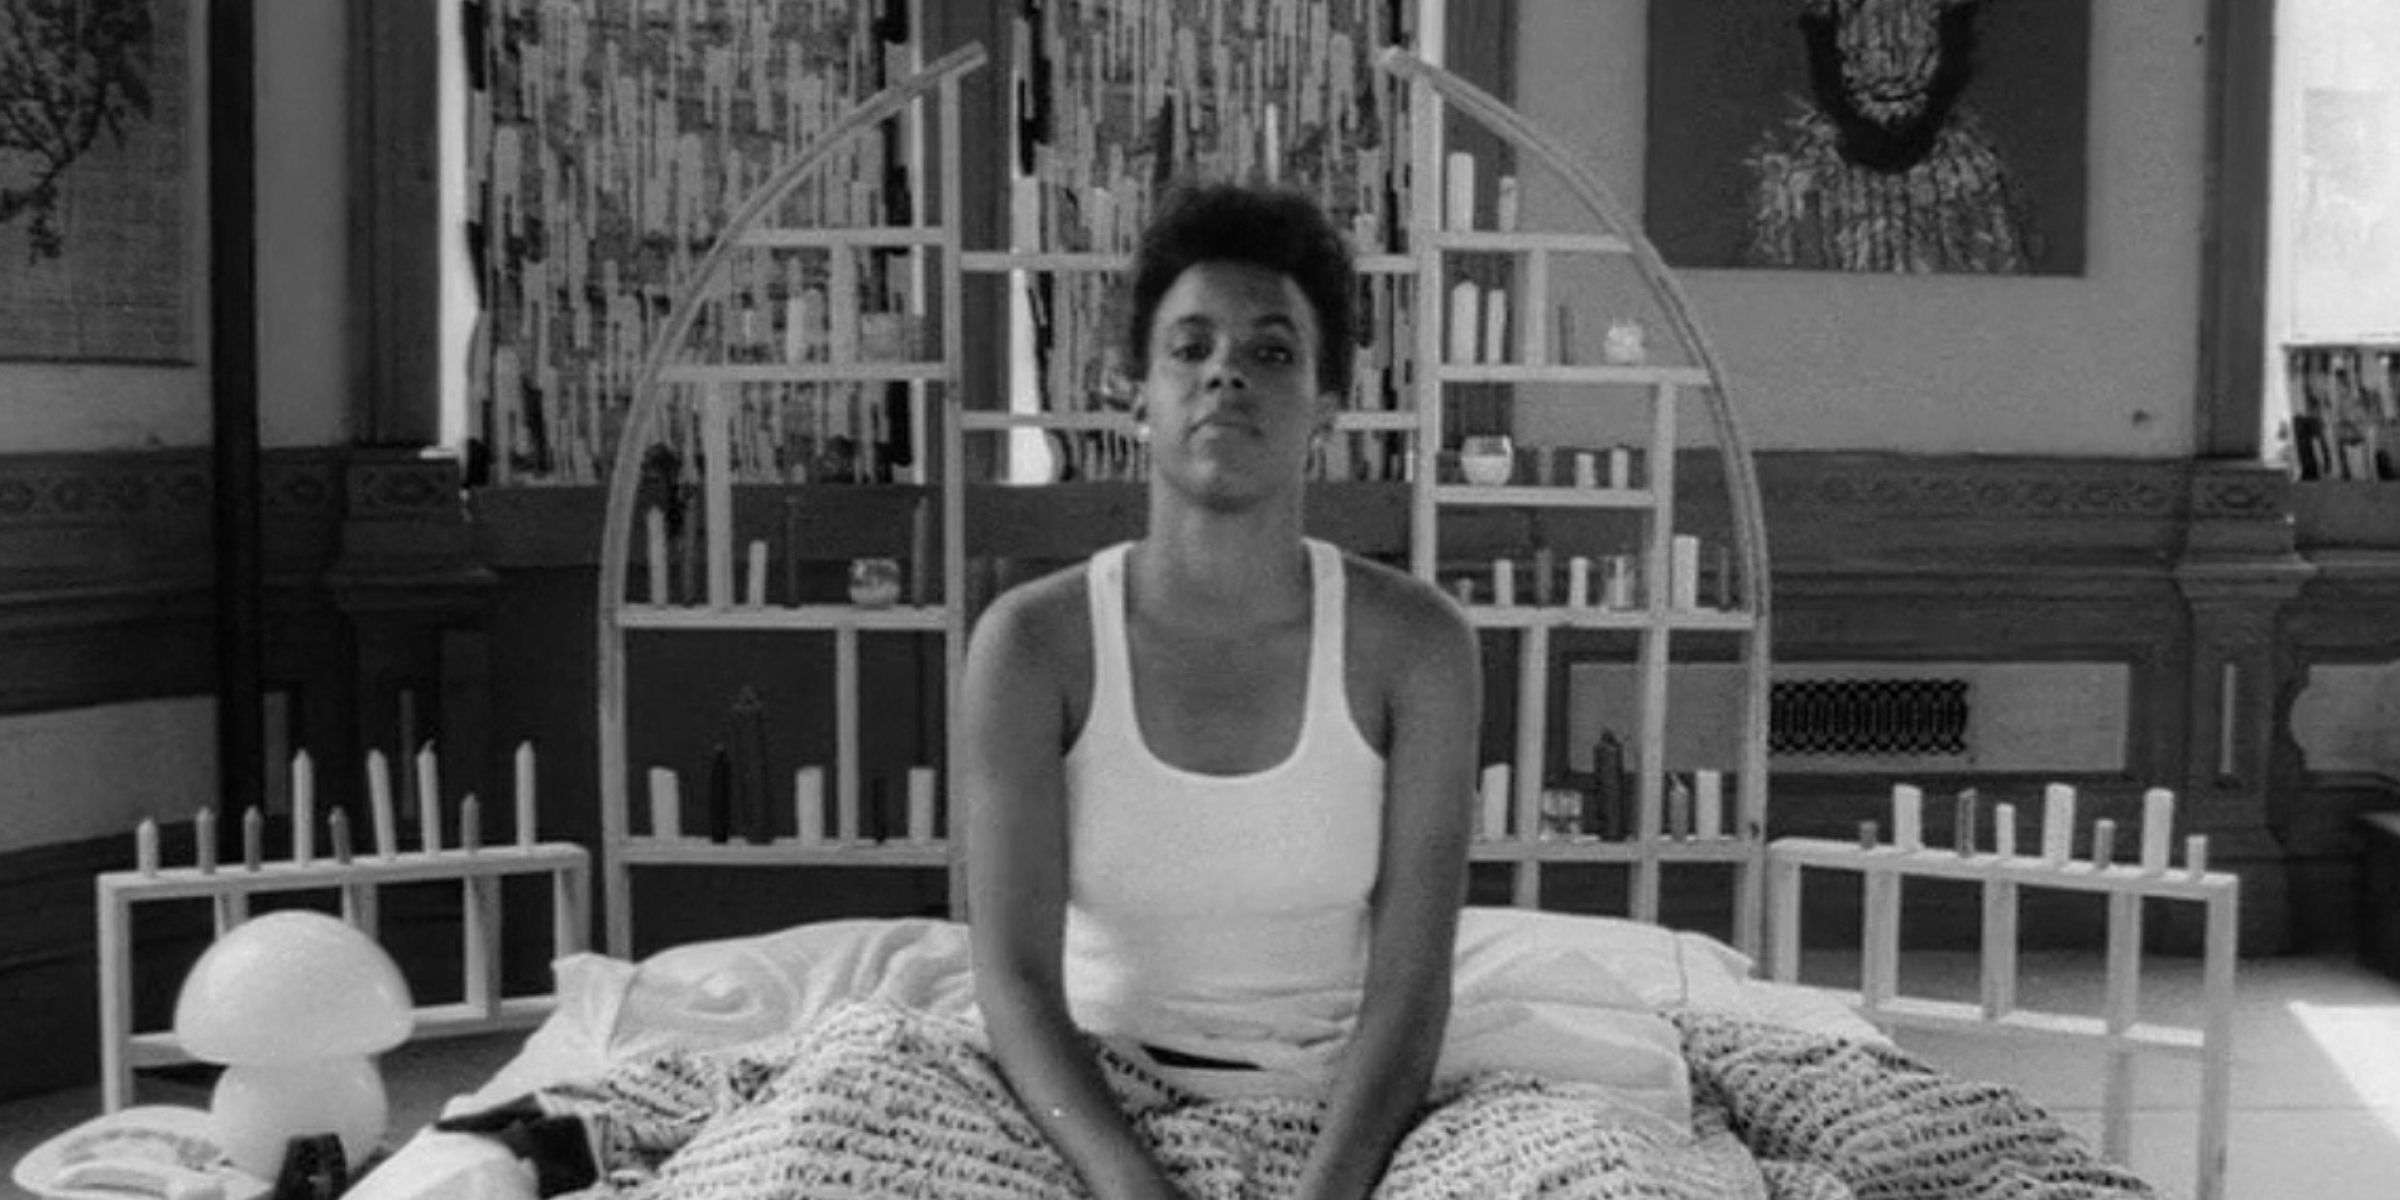 Nola in her bed in Shes Gotta Have It 1986